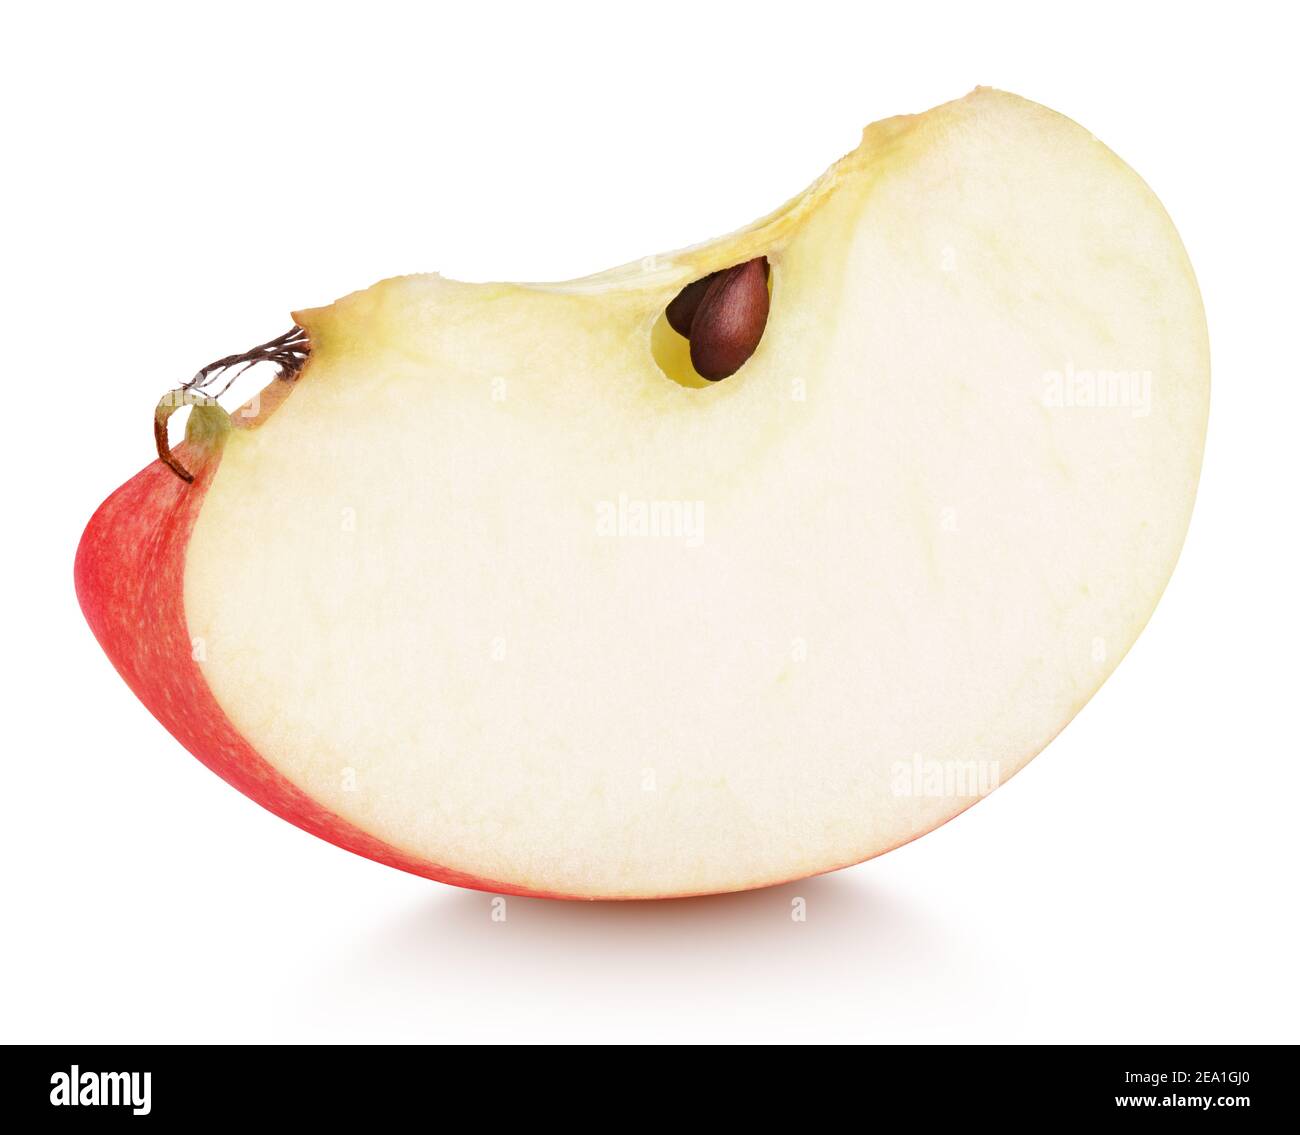 Slice of red apple fruit isolated on white background with shadow. Red apple wedge with seeds Stock Photo